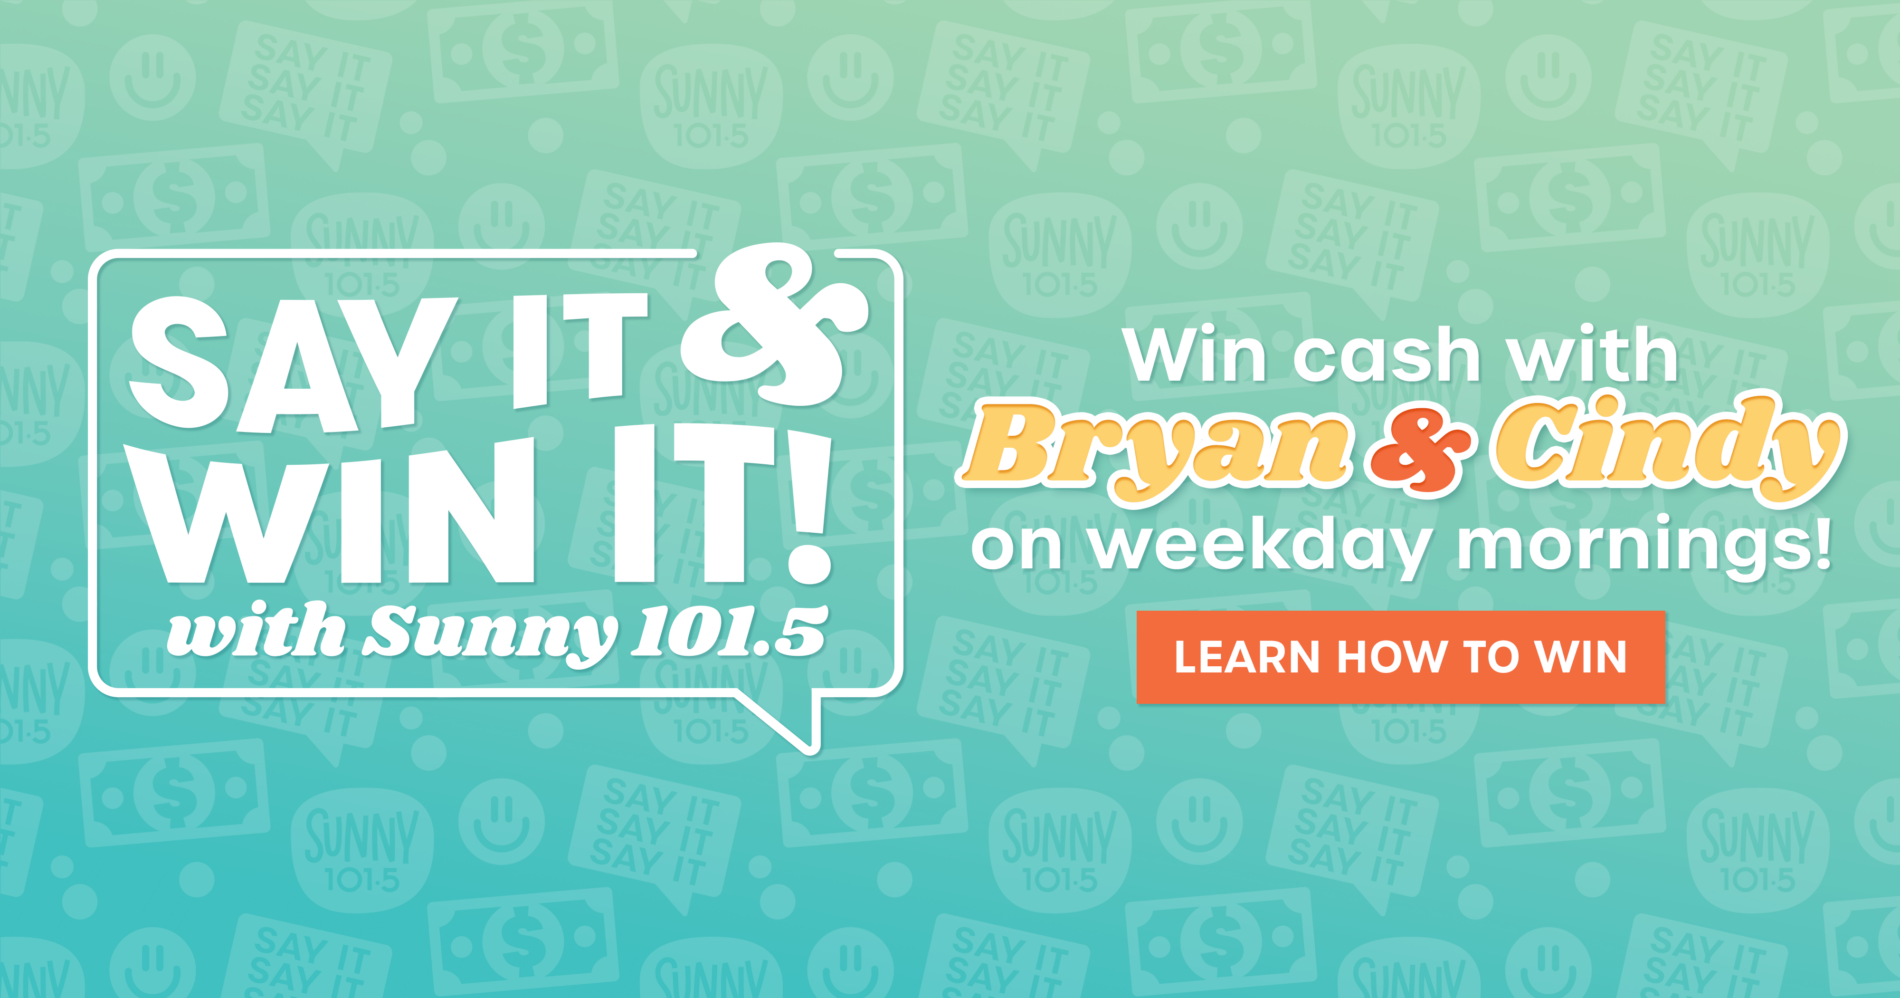 Click to learn how you can win cash with Bryan & Cindy on weekday mornings!